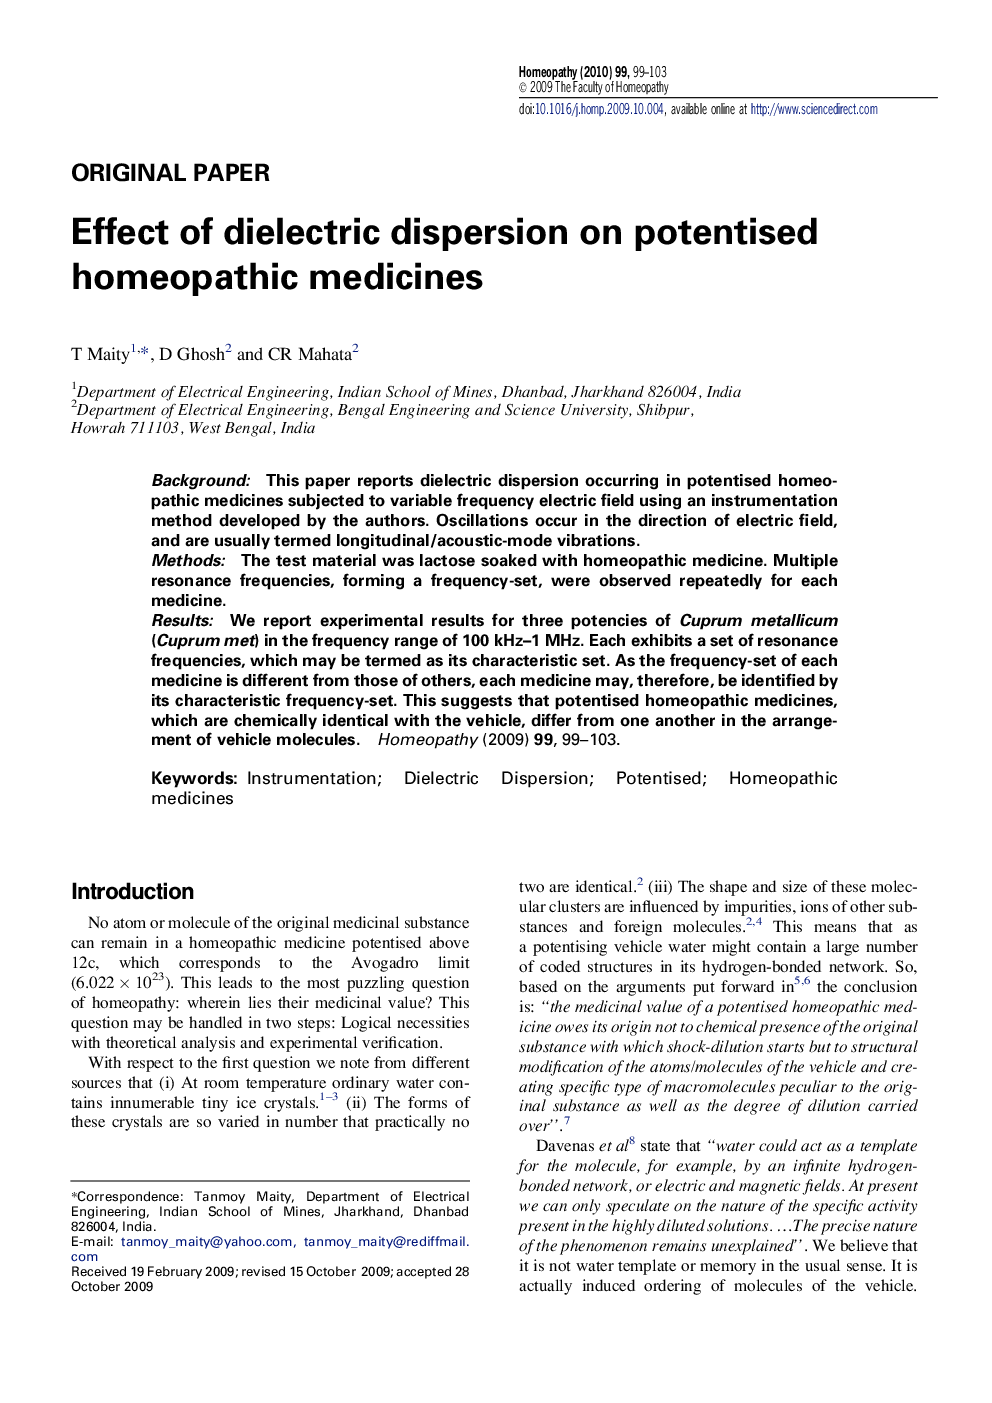 Effect of dielectric dispersion on potentised homeopathic medicines